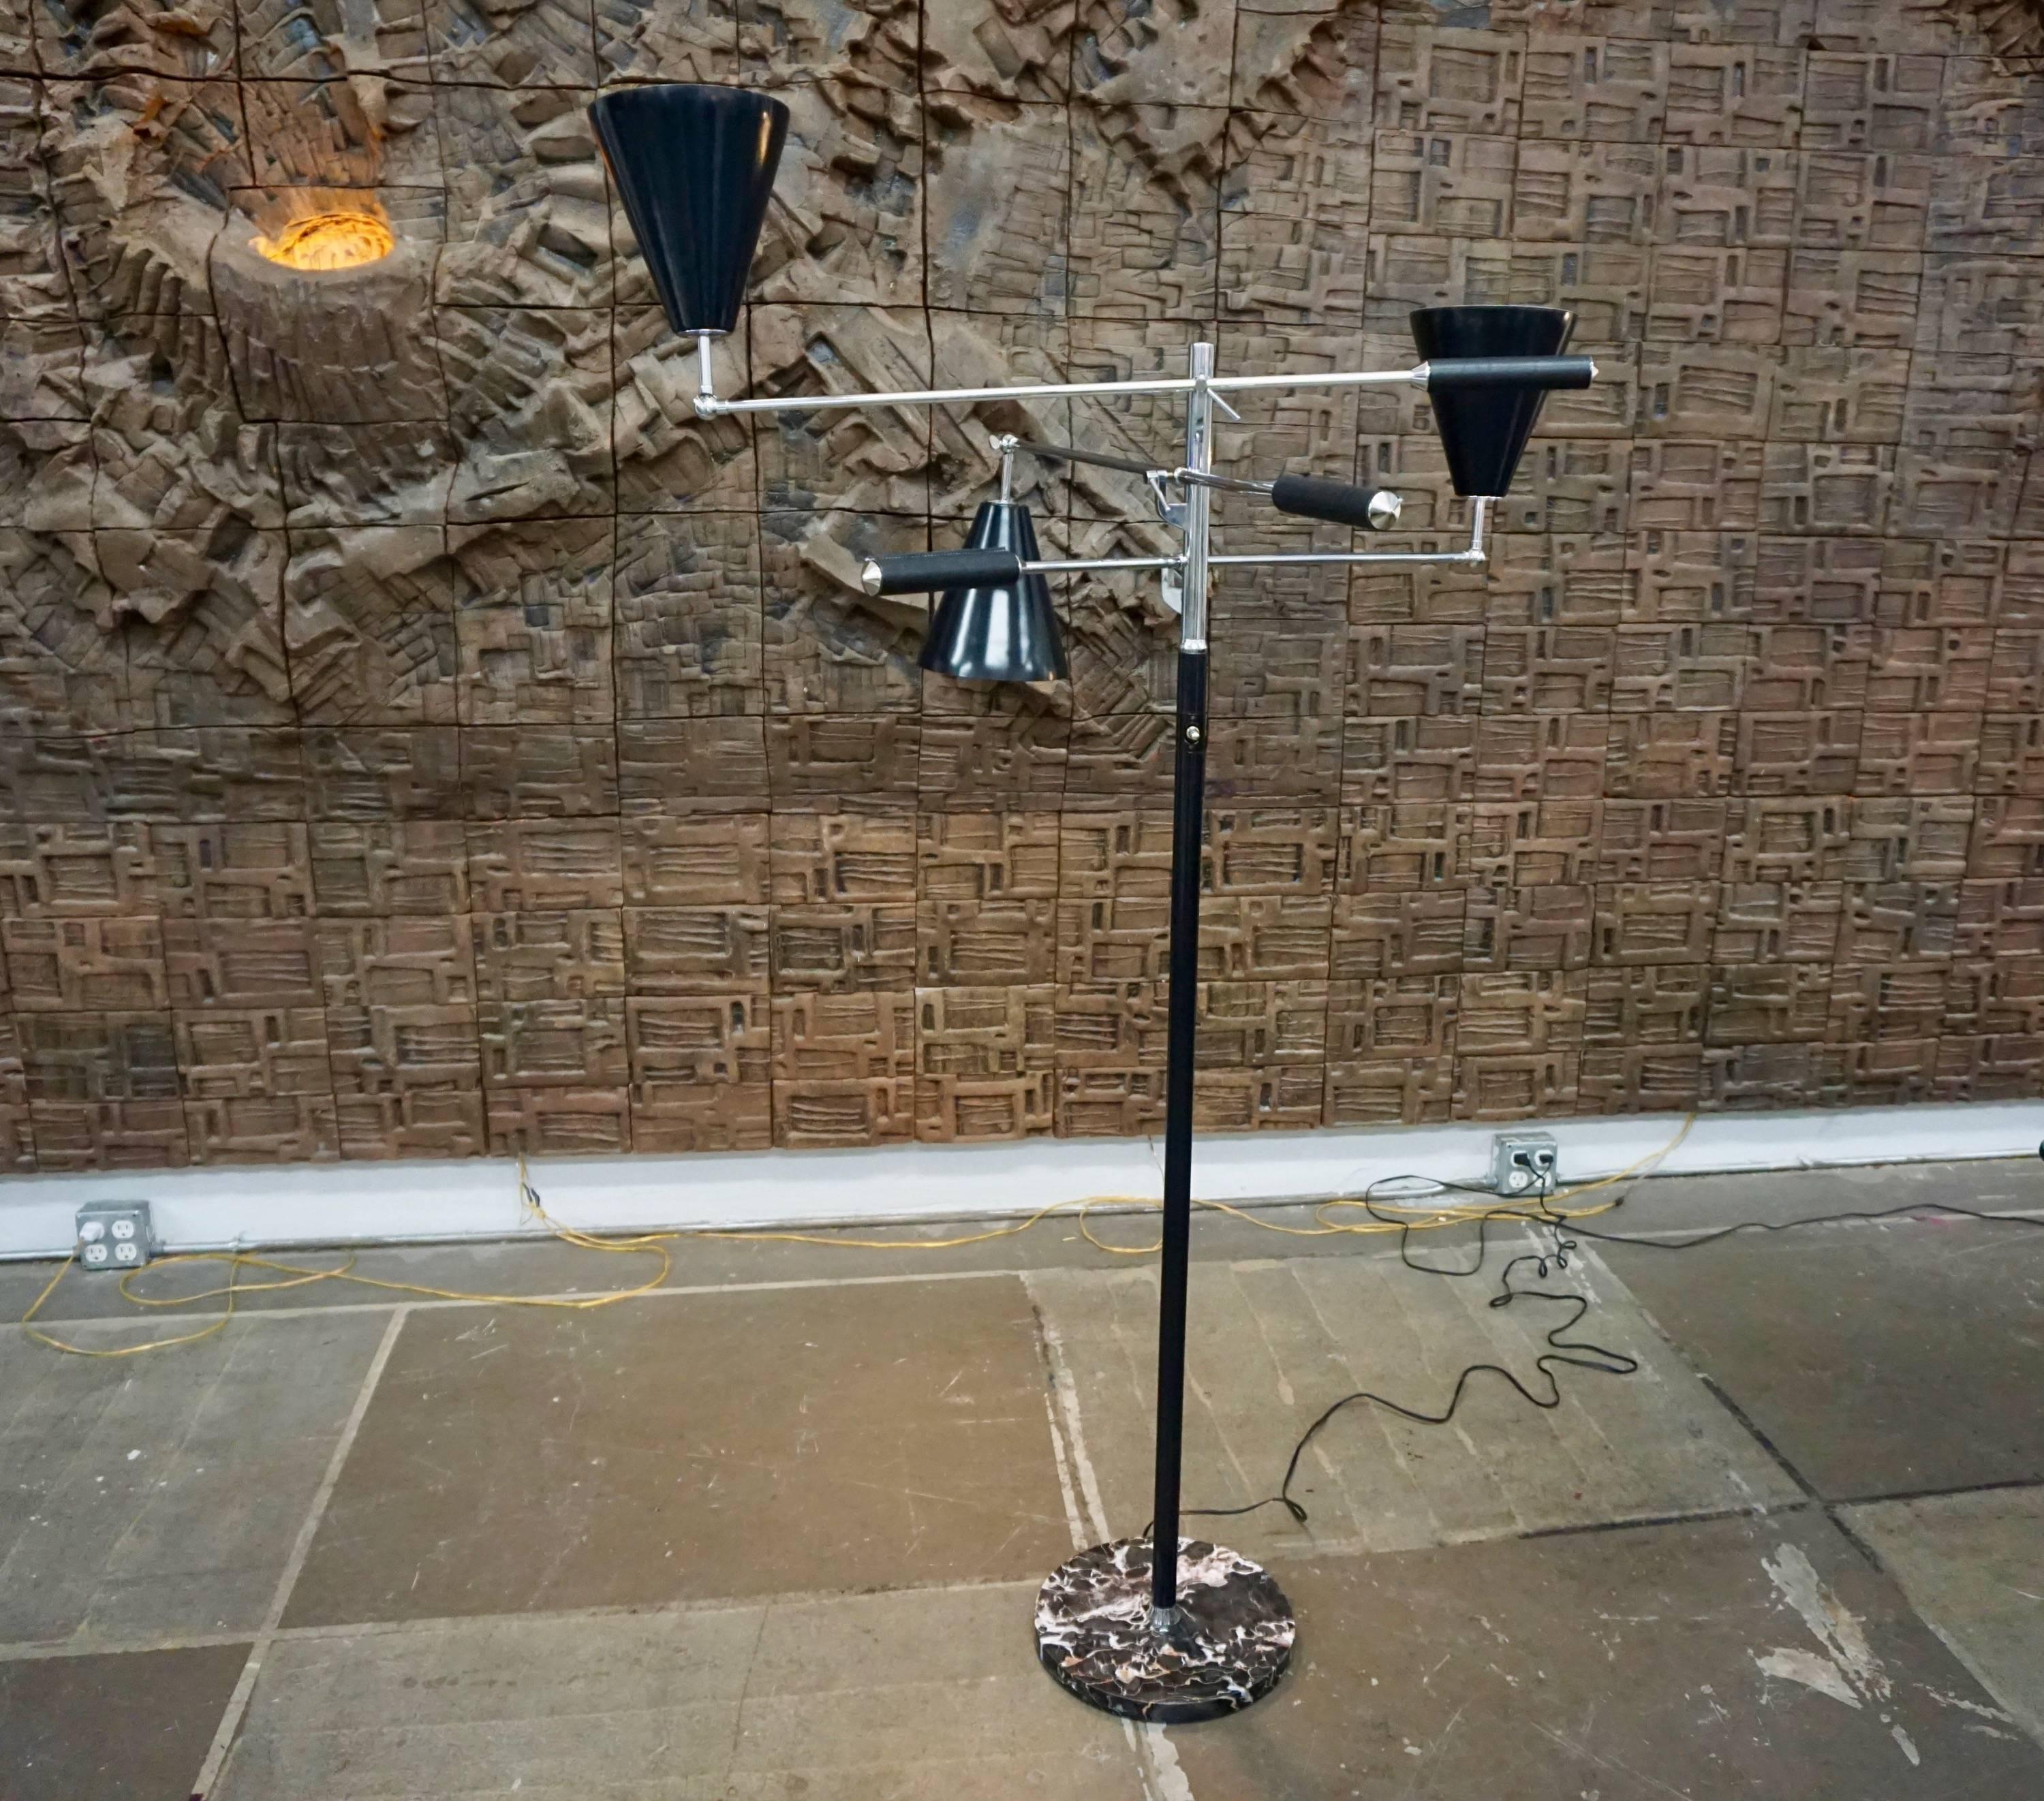 Sculptural three-armed floor lamp in the style of Arredoluce, Italy. A chromed shaft and adjustable, articulating arms with stitched black leather handles and black metal shades; all seated in a round marble base. Stamped “Made in Italy“ at the top